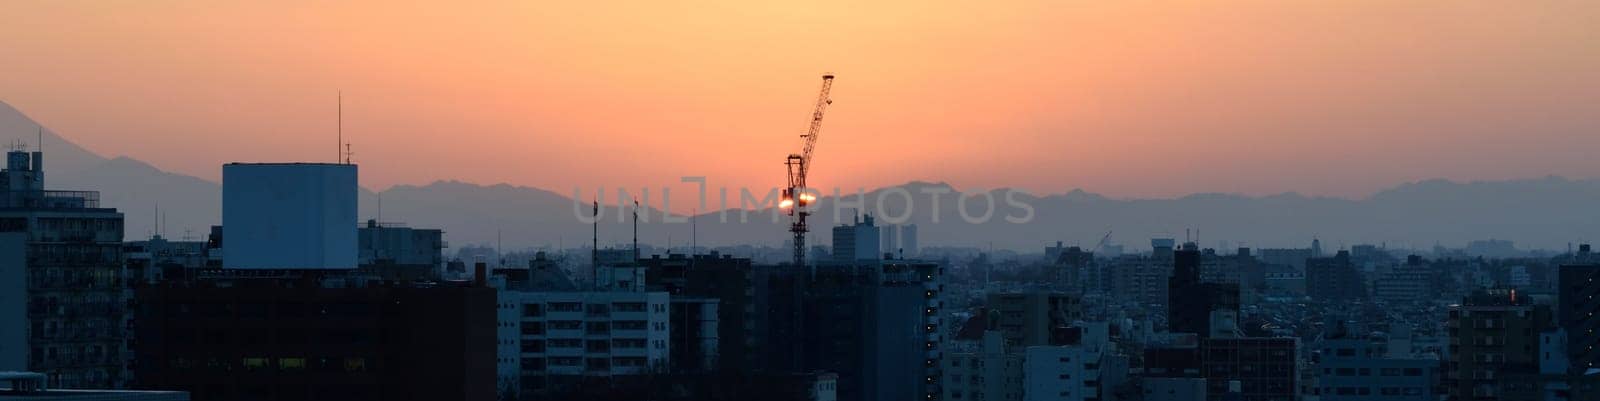 Panoramic city skyline at sunset with silhouettes of buildings and a vibrant orange sky.